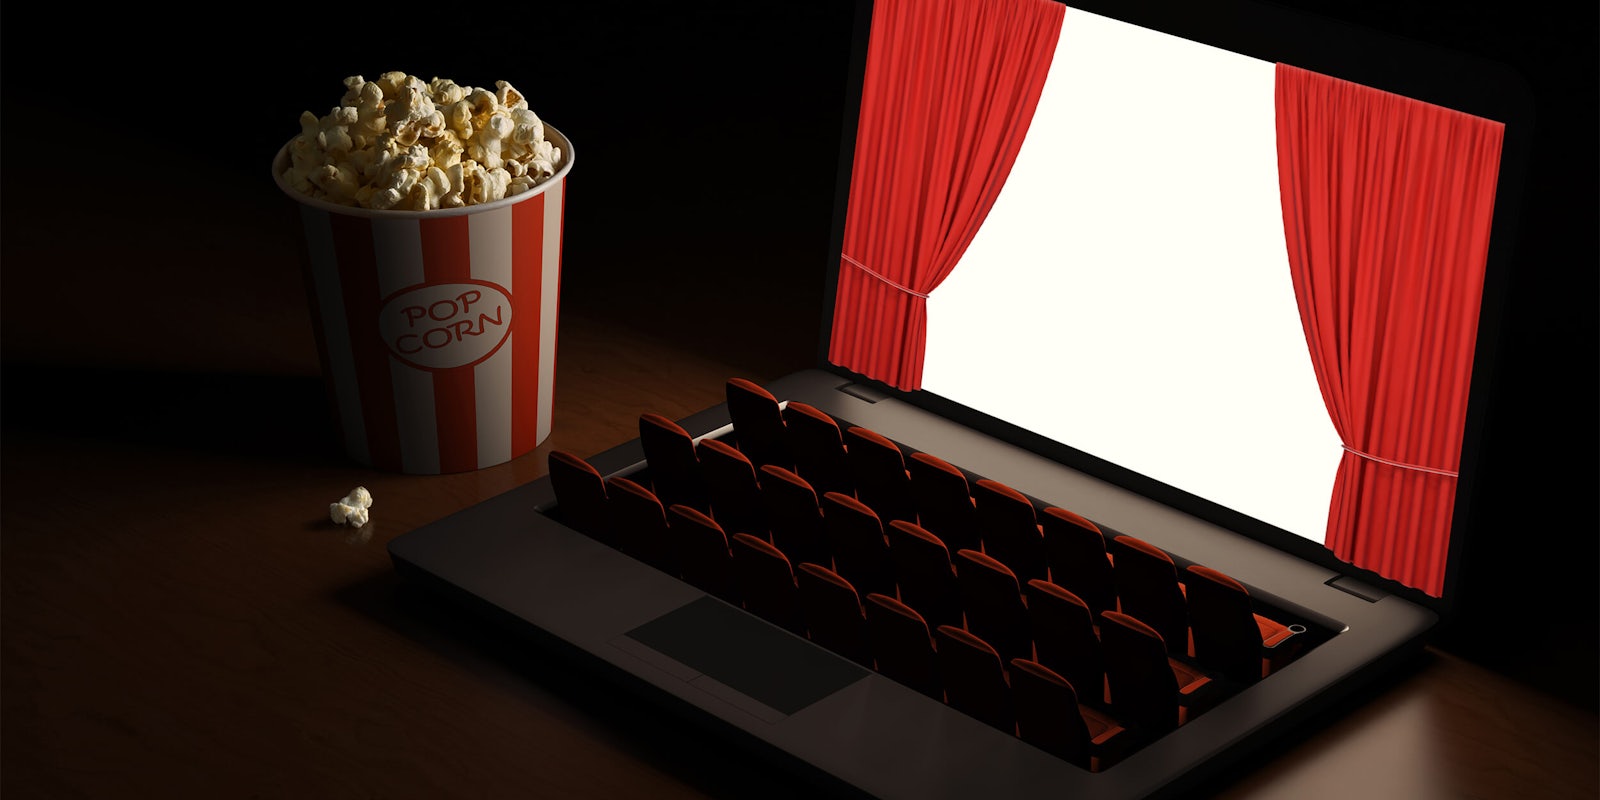 movie theater seats in place of keyboard on laptop, screen has red curtains opening